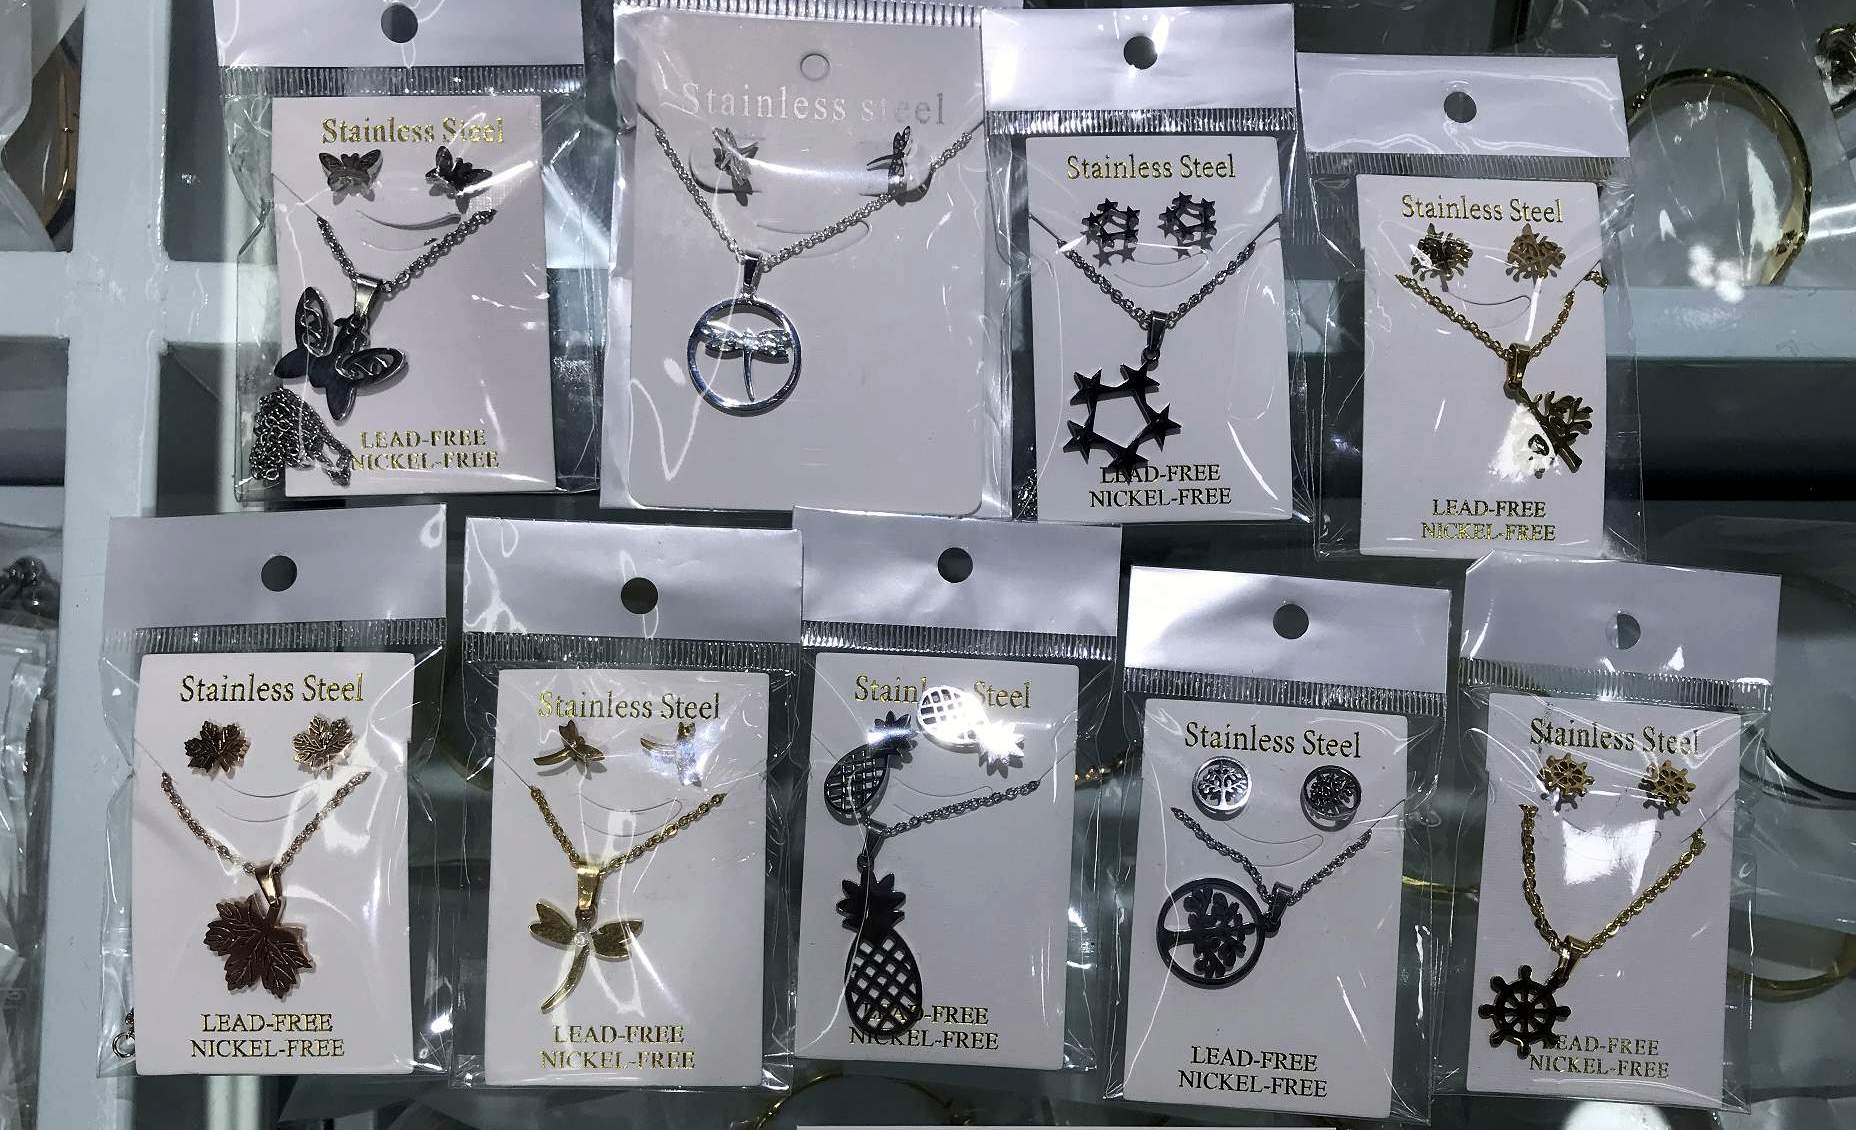 Price for Stainless Steel Jewelry in Yiwu Wholesale Market